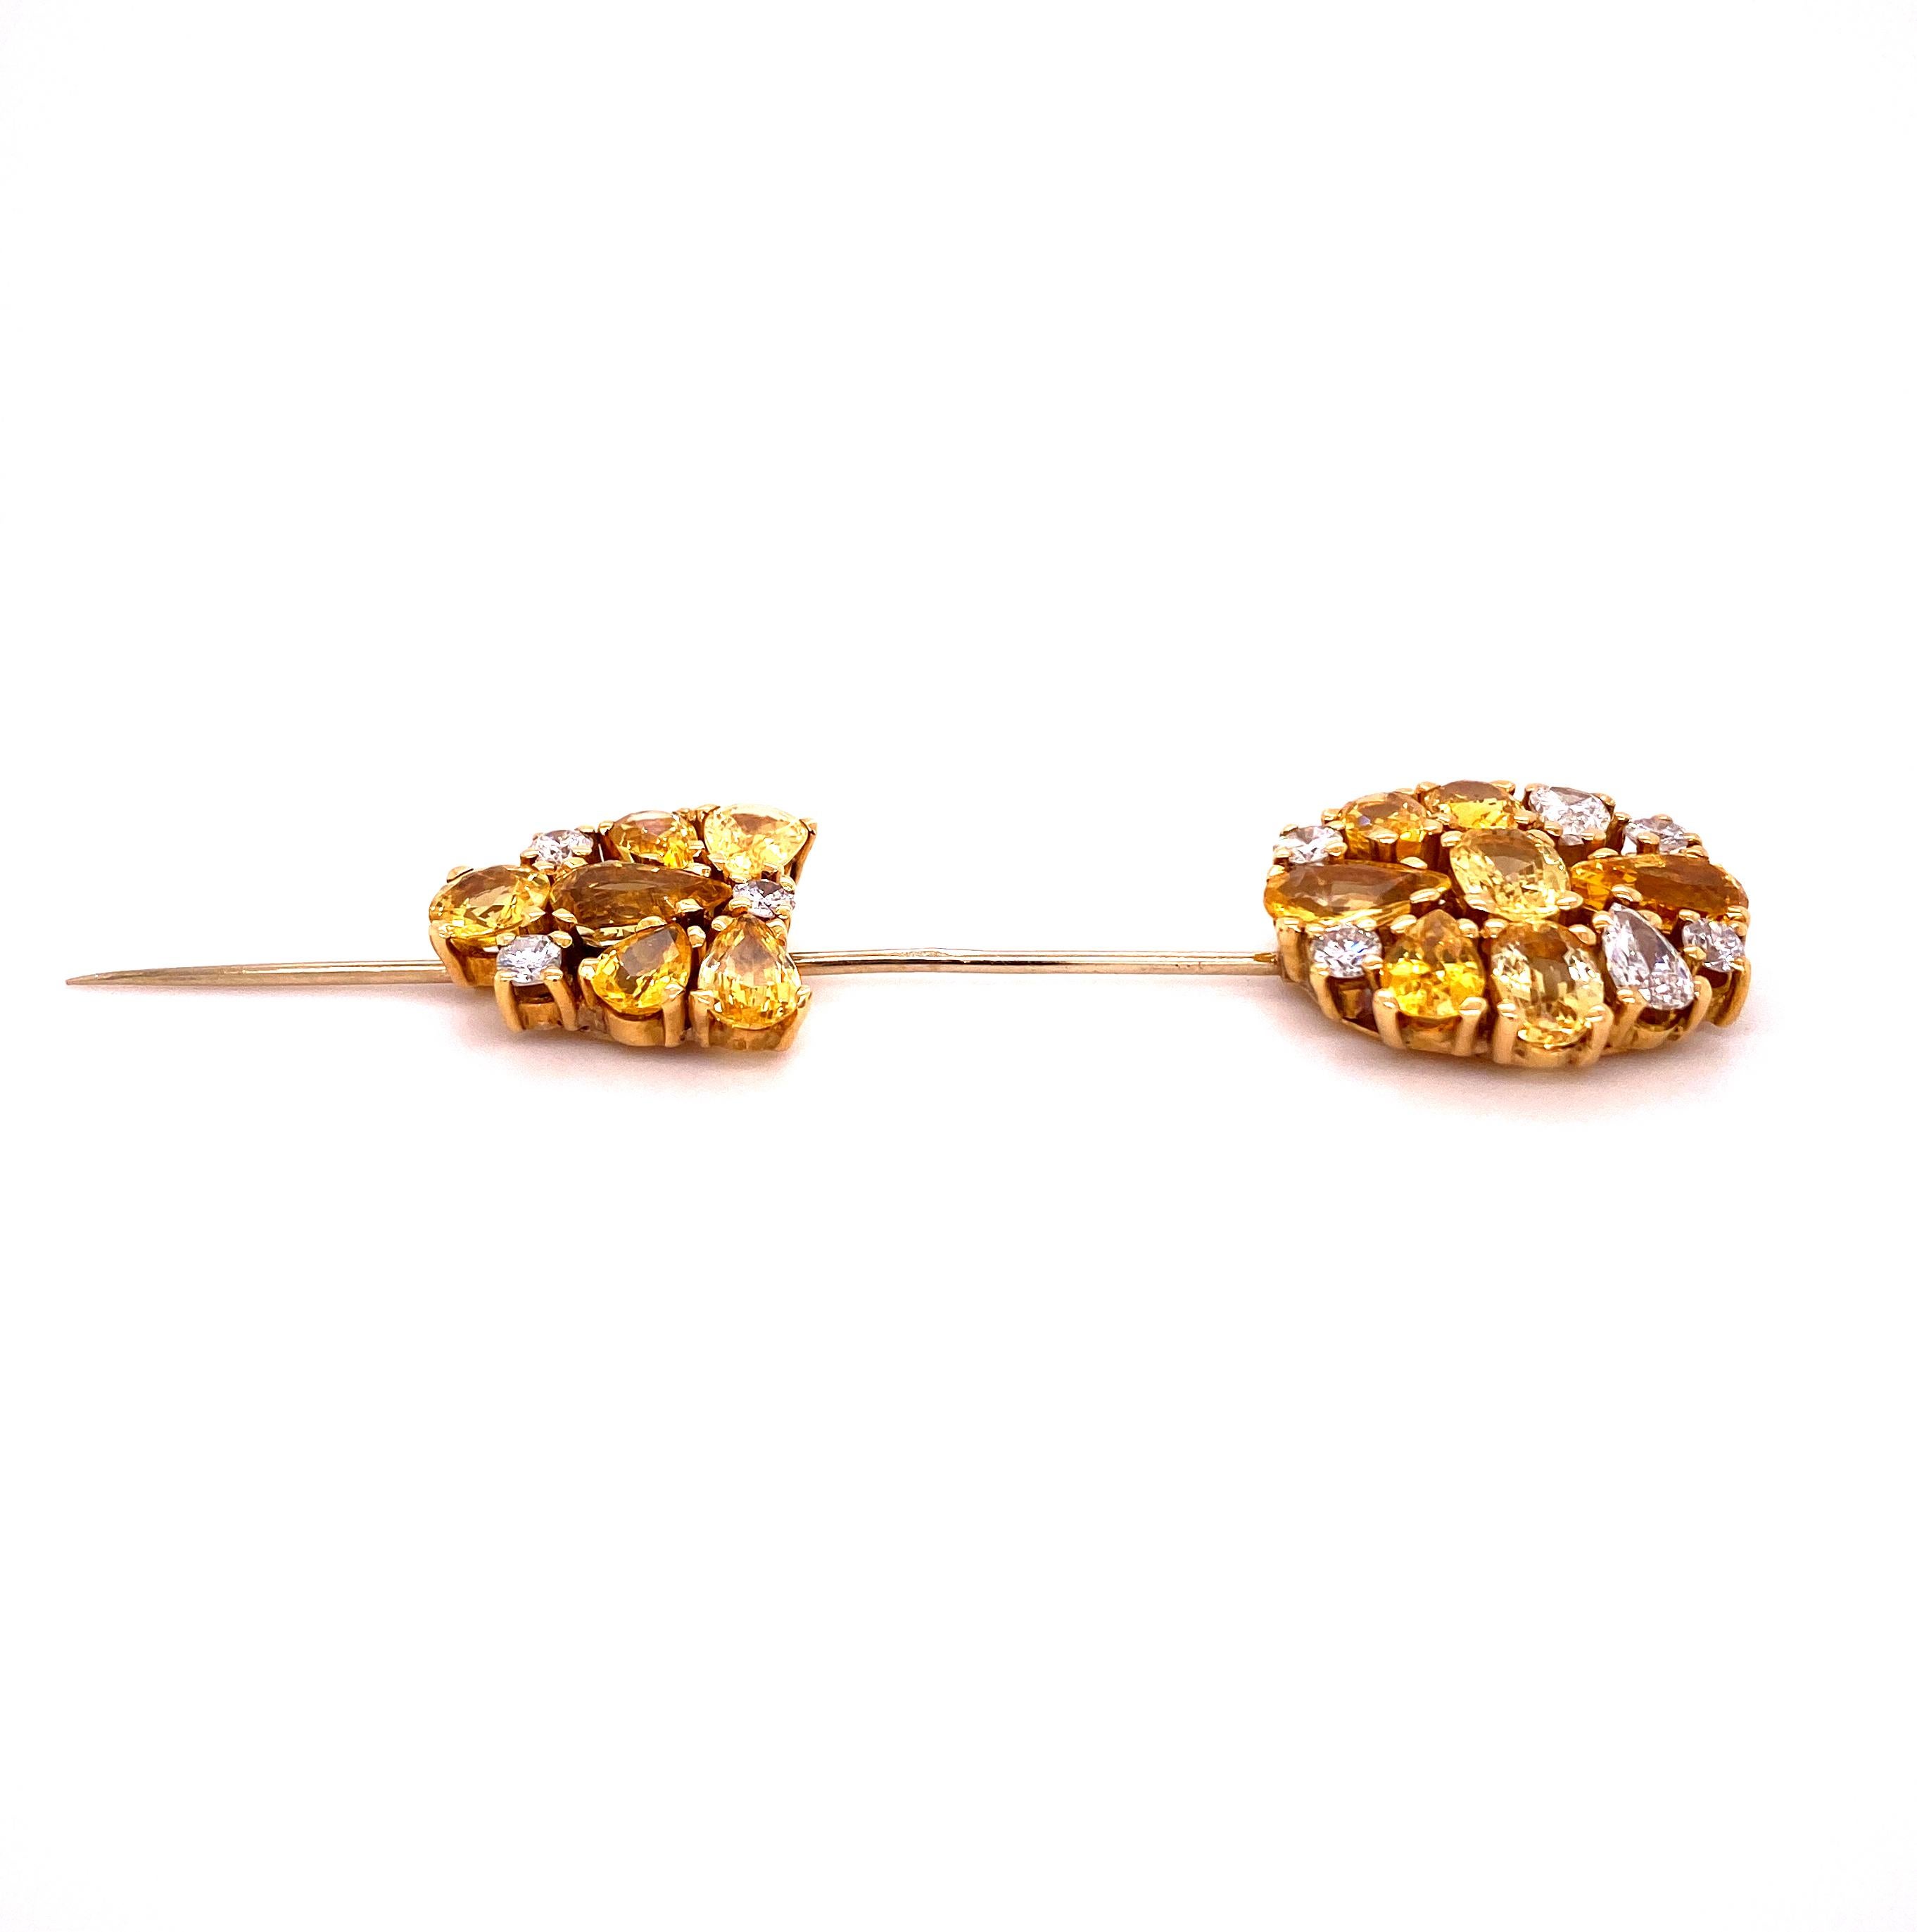 Magnificent Yellow Sapphire and Diamond Pin in 18k Yellow Gold For Sale 4